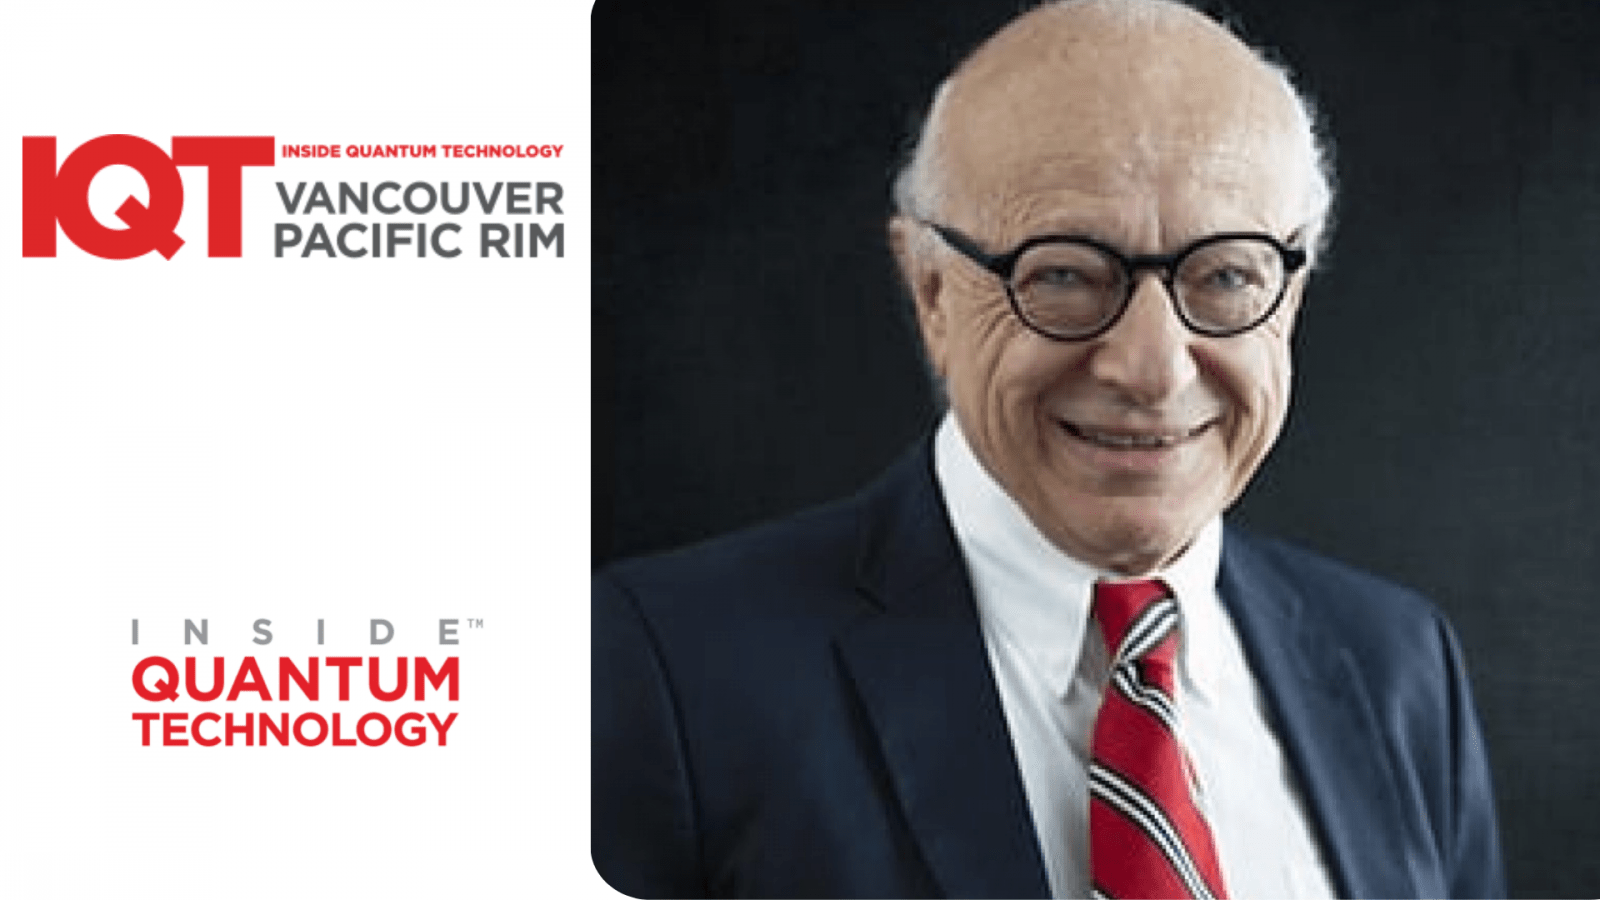 IQT Vancouver/Pacific Rim Update: Lawrence Gasman, Co-Founder of Inside Quantum Technology (IQT), is a 2024 Speaker